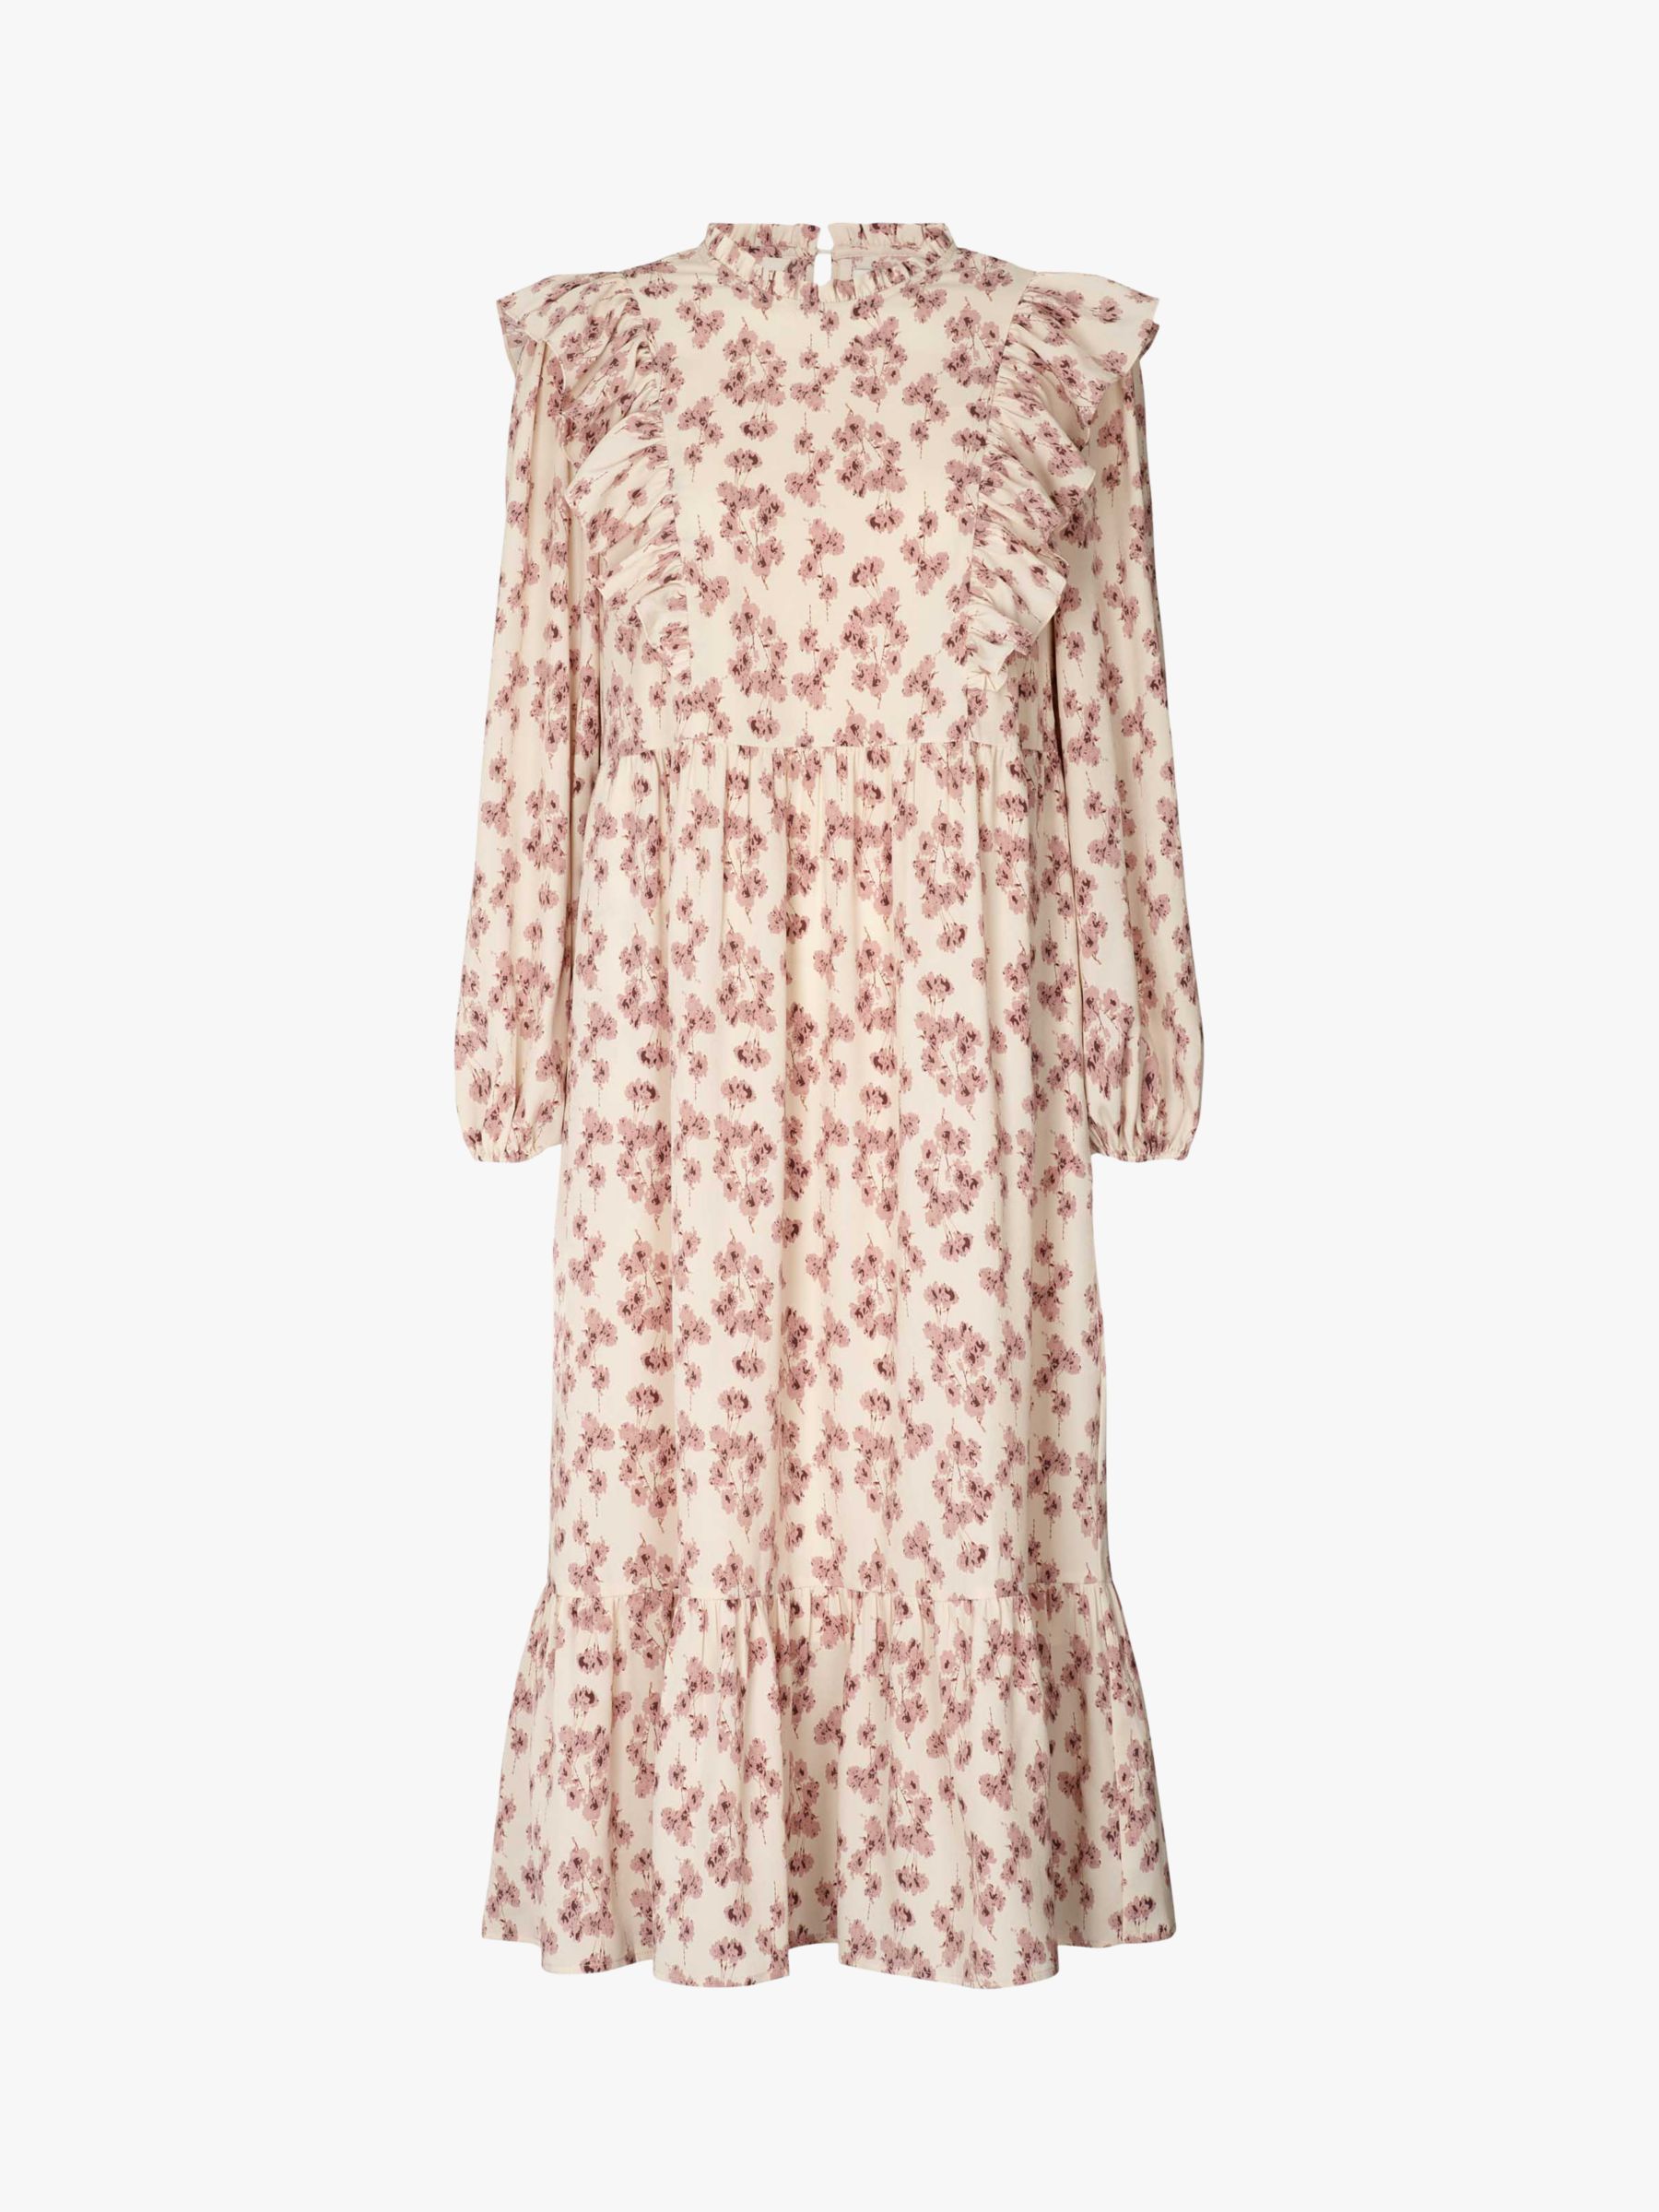 Buy Lollys Laundry Cana Floral Print Tiered Hem Midi Skirt, Creme Online at johnlewis.com